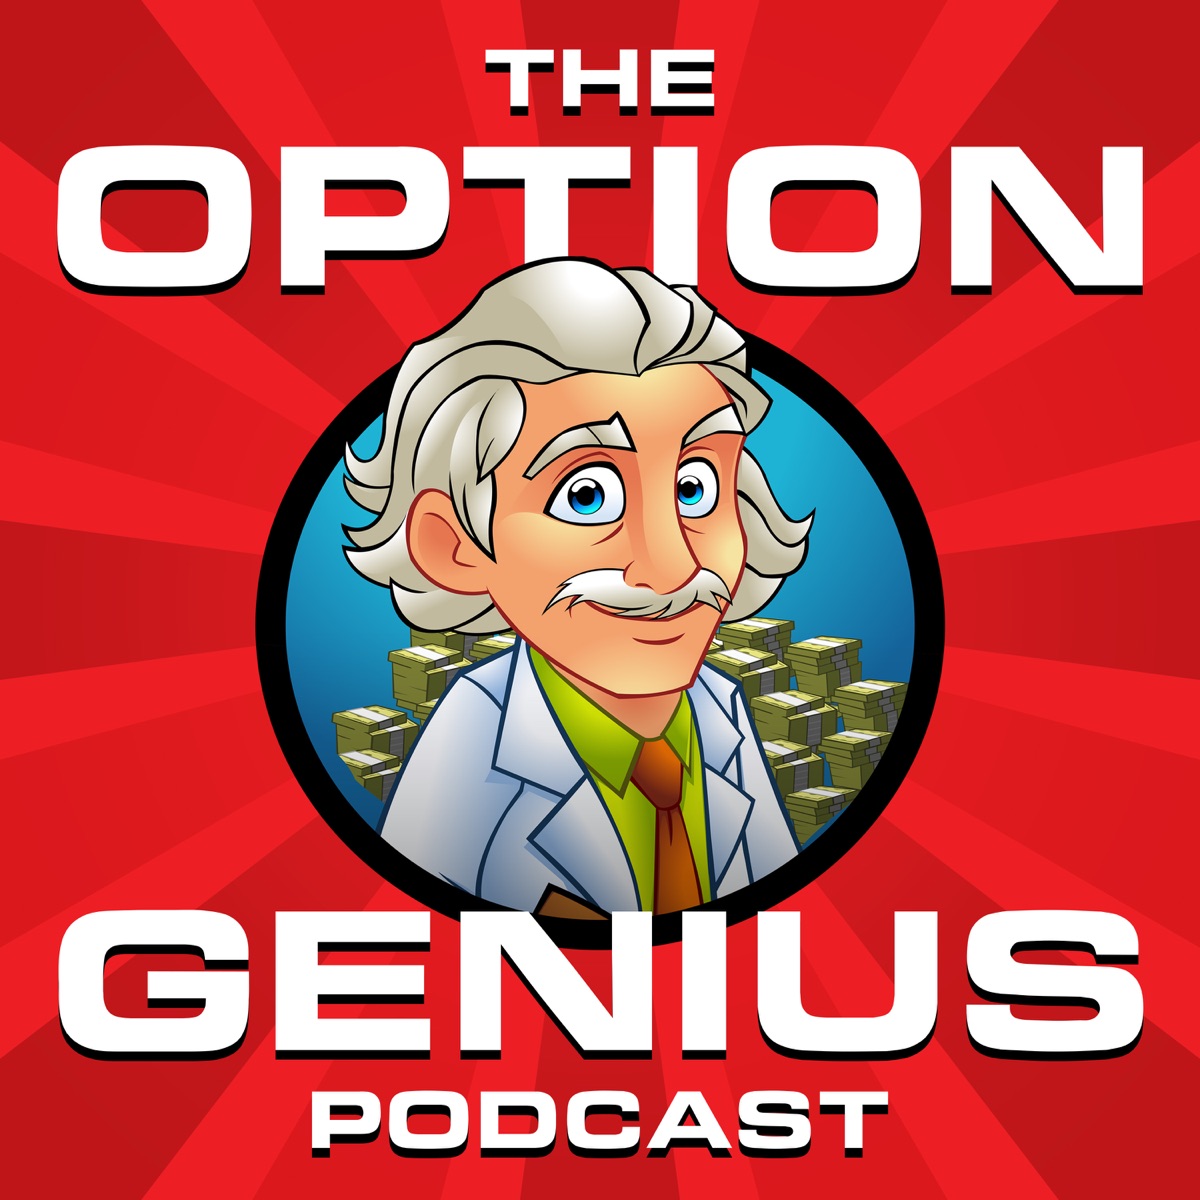 The Option Genius Podcast Options Trading For Income And Growth Podcast Podtail - error code 529 roblox adopt me